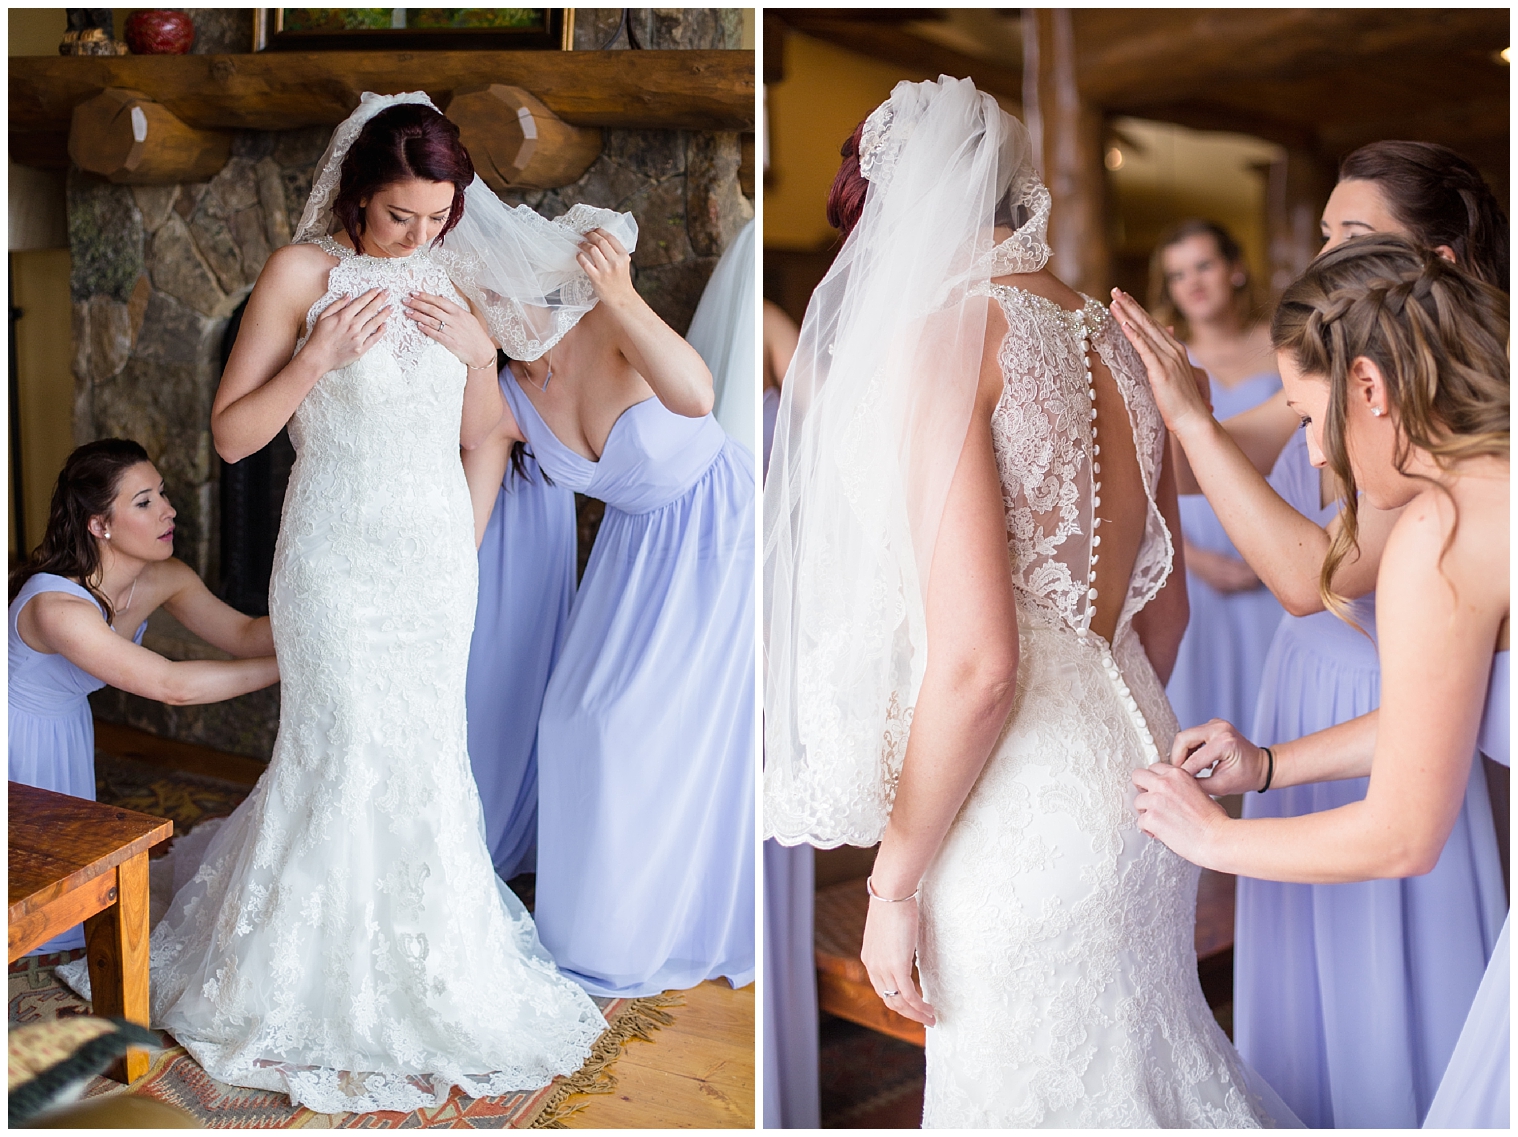 Bridesmaids help the bride into her dress before her wedding at Sevens in Breckenridge.